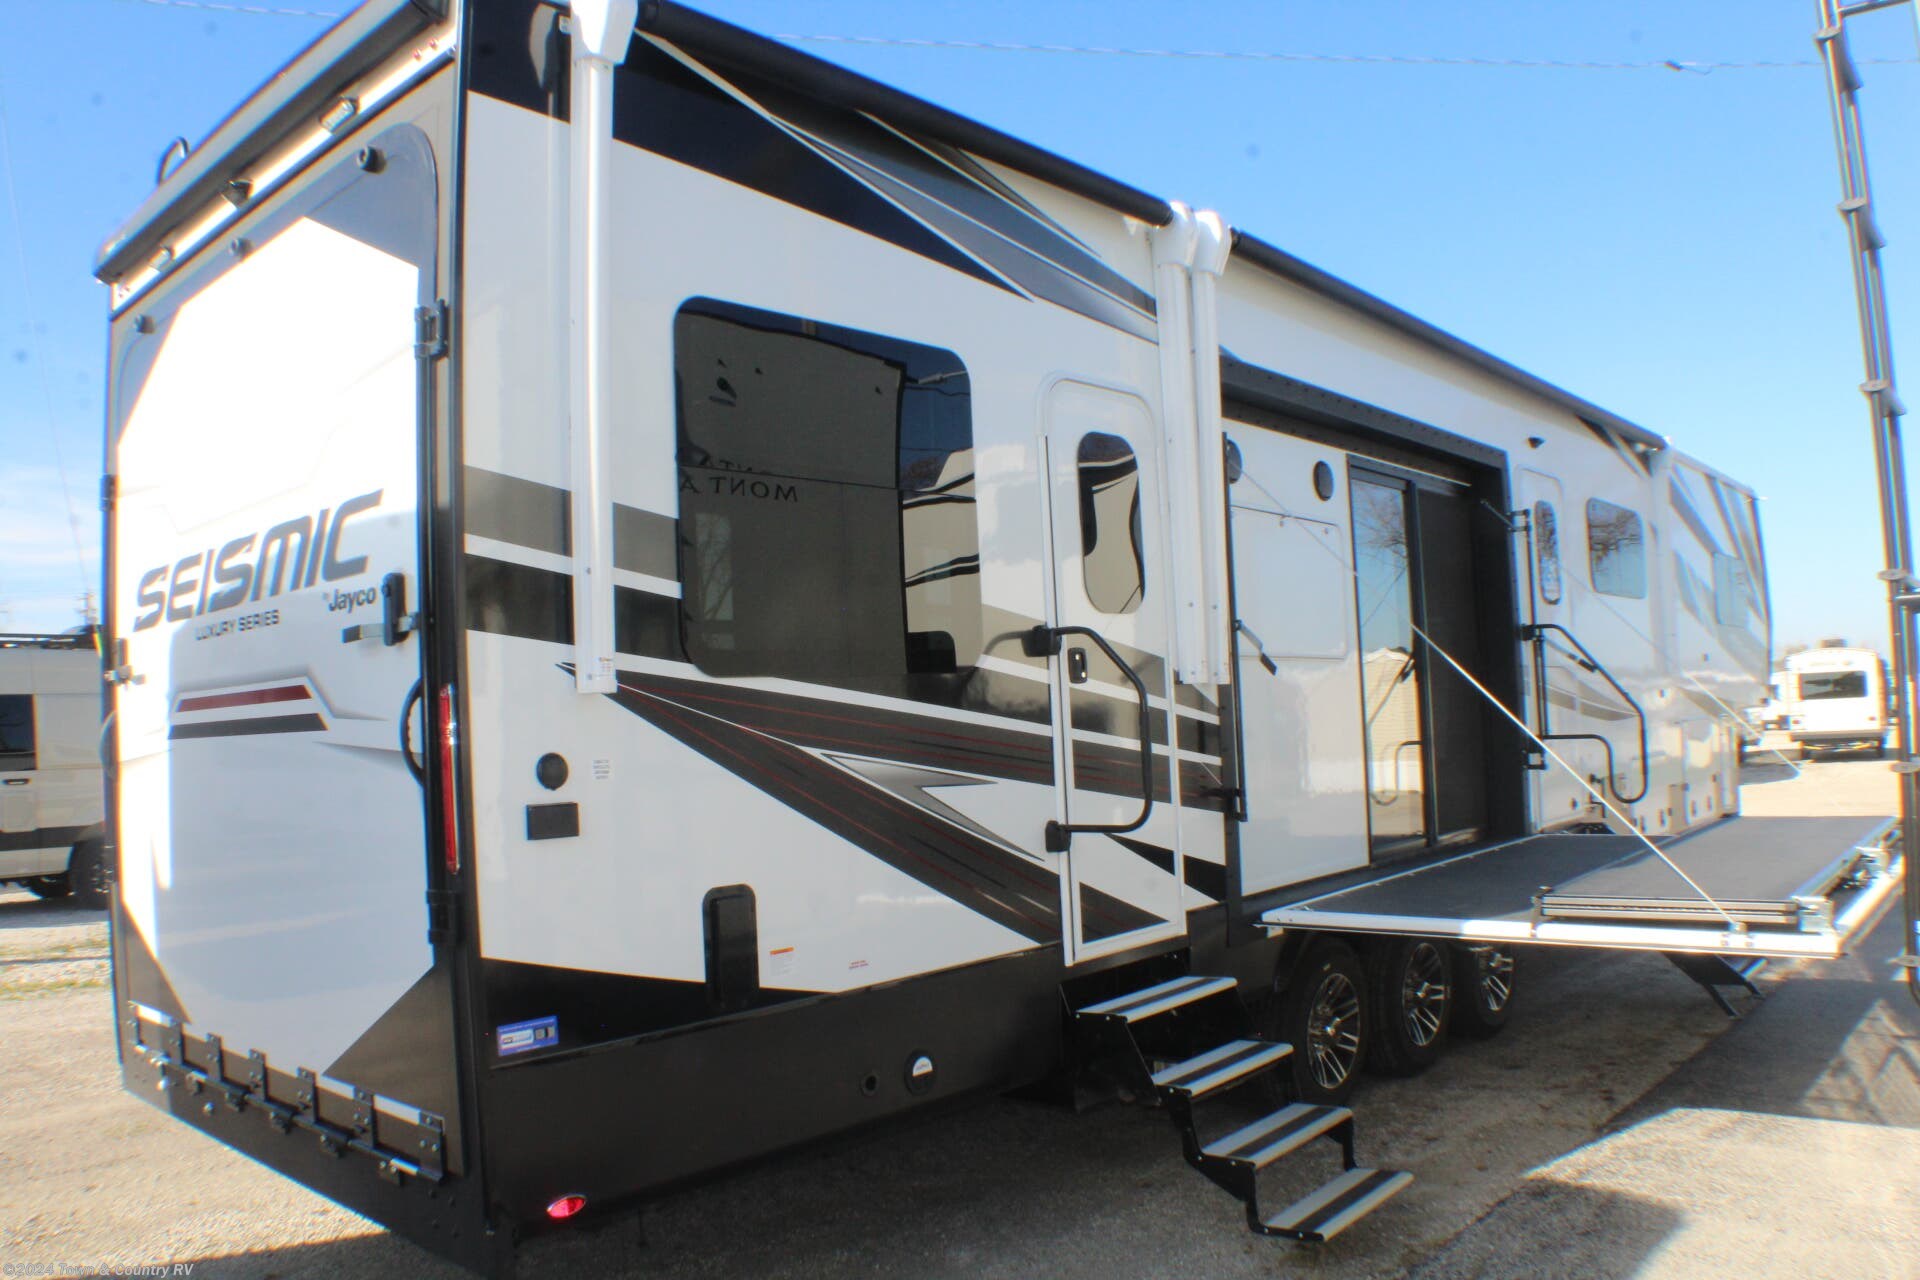 2023 Jayco Seismic Luxury Series 4113 RV for Sale in Clyde, OH 43410